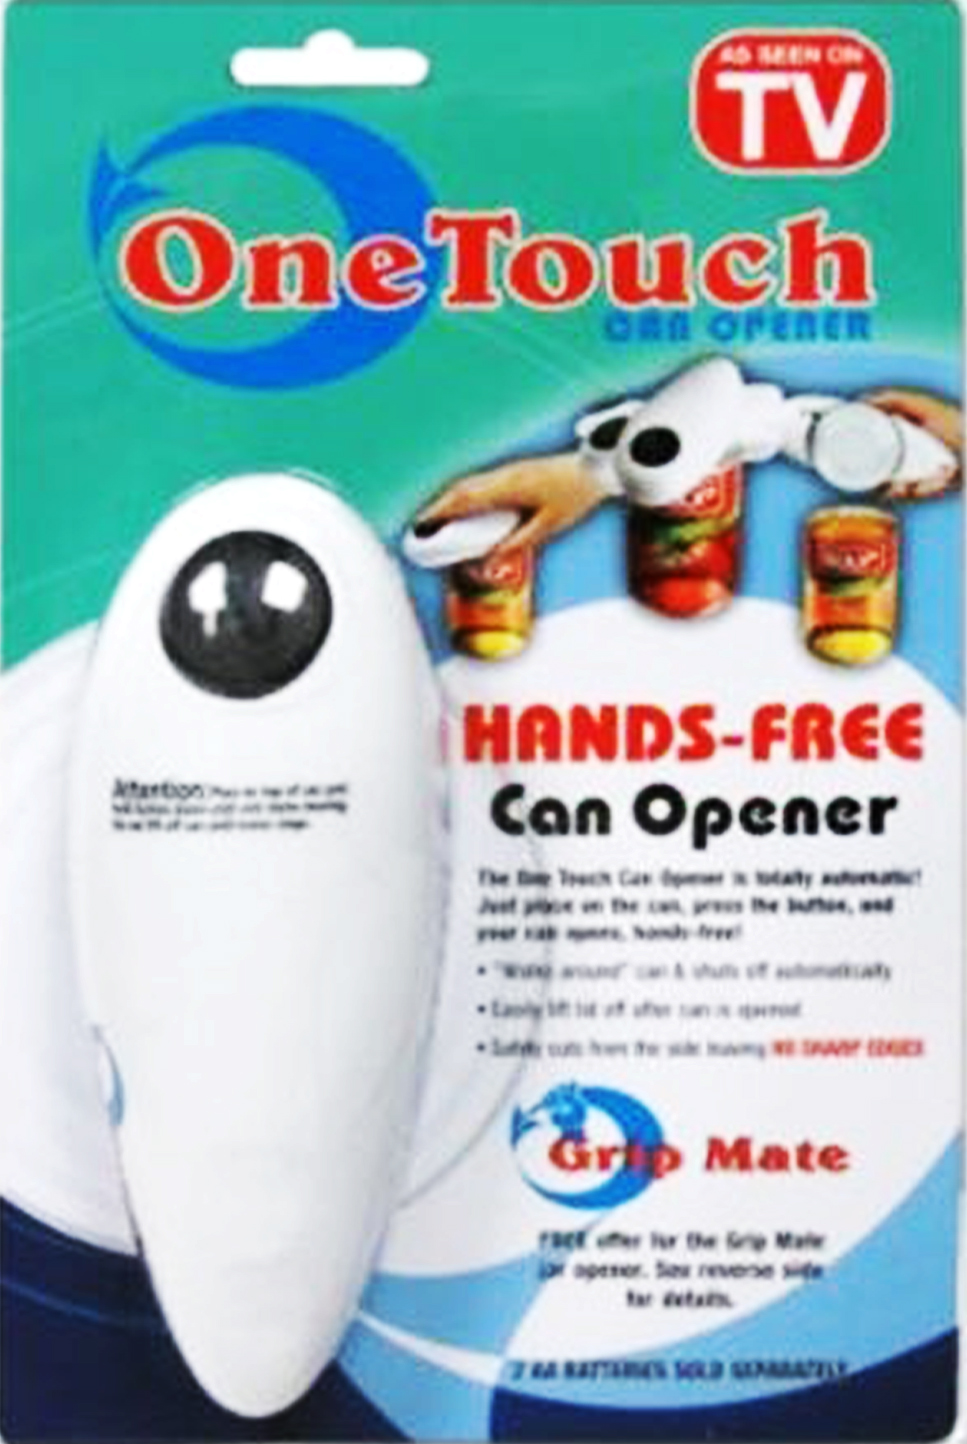 One touch can opener | Best Of As Seen On TV